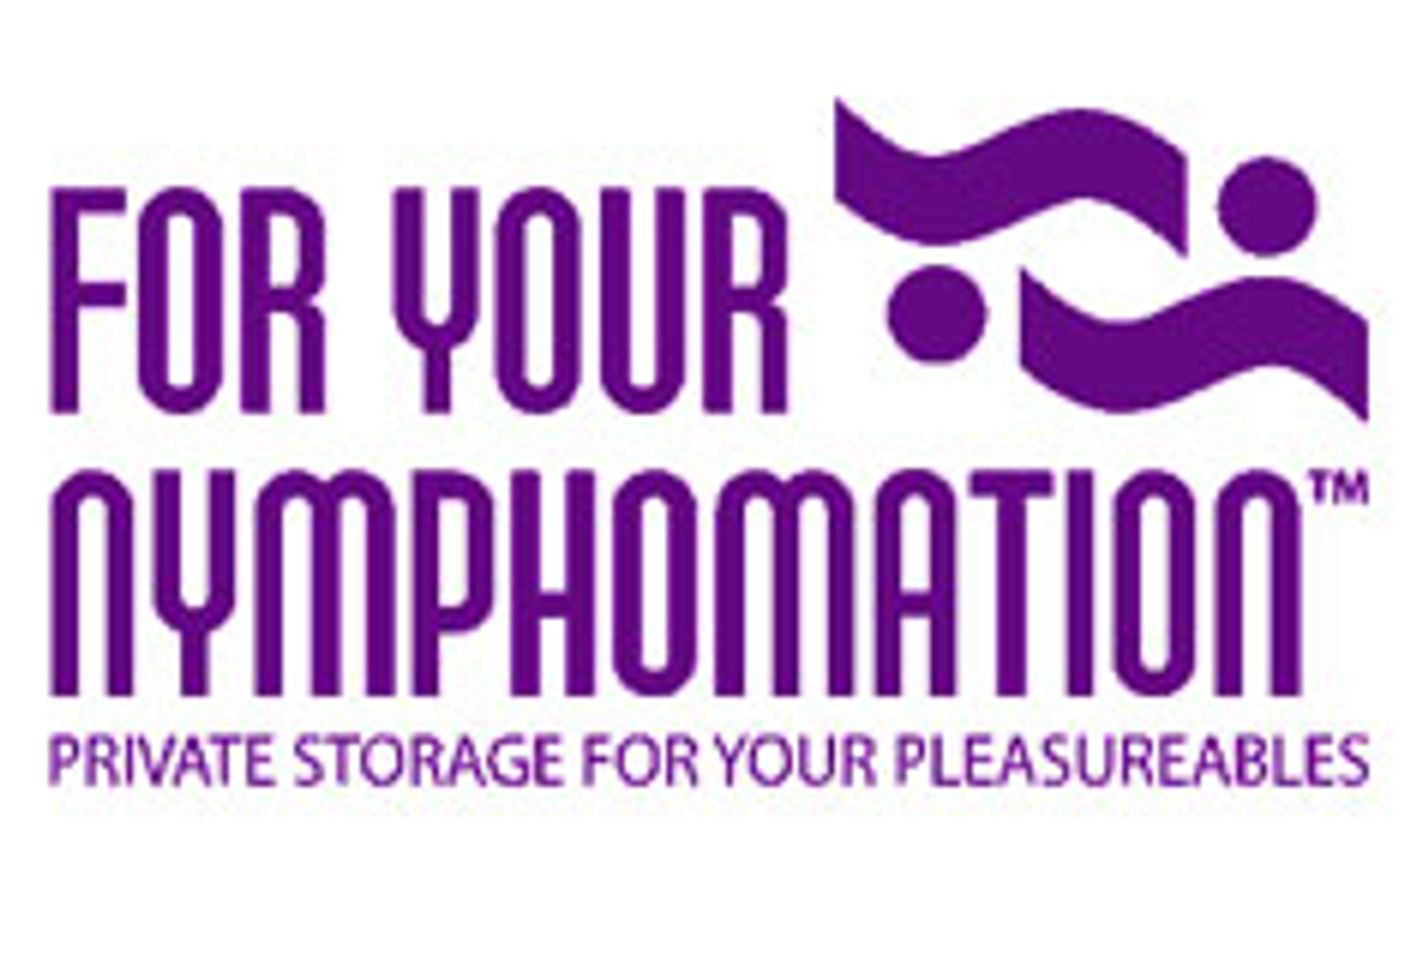 For Your Nymphomation Offers Buy 1, Get 1 Special